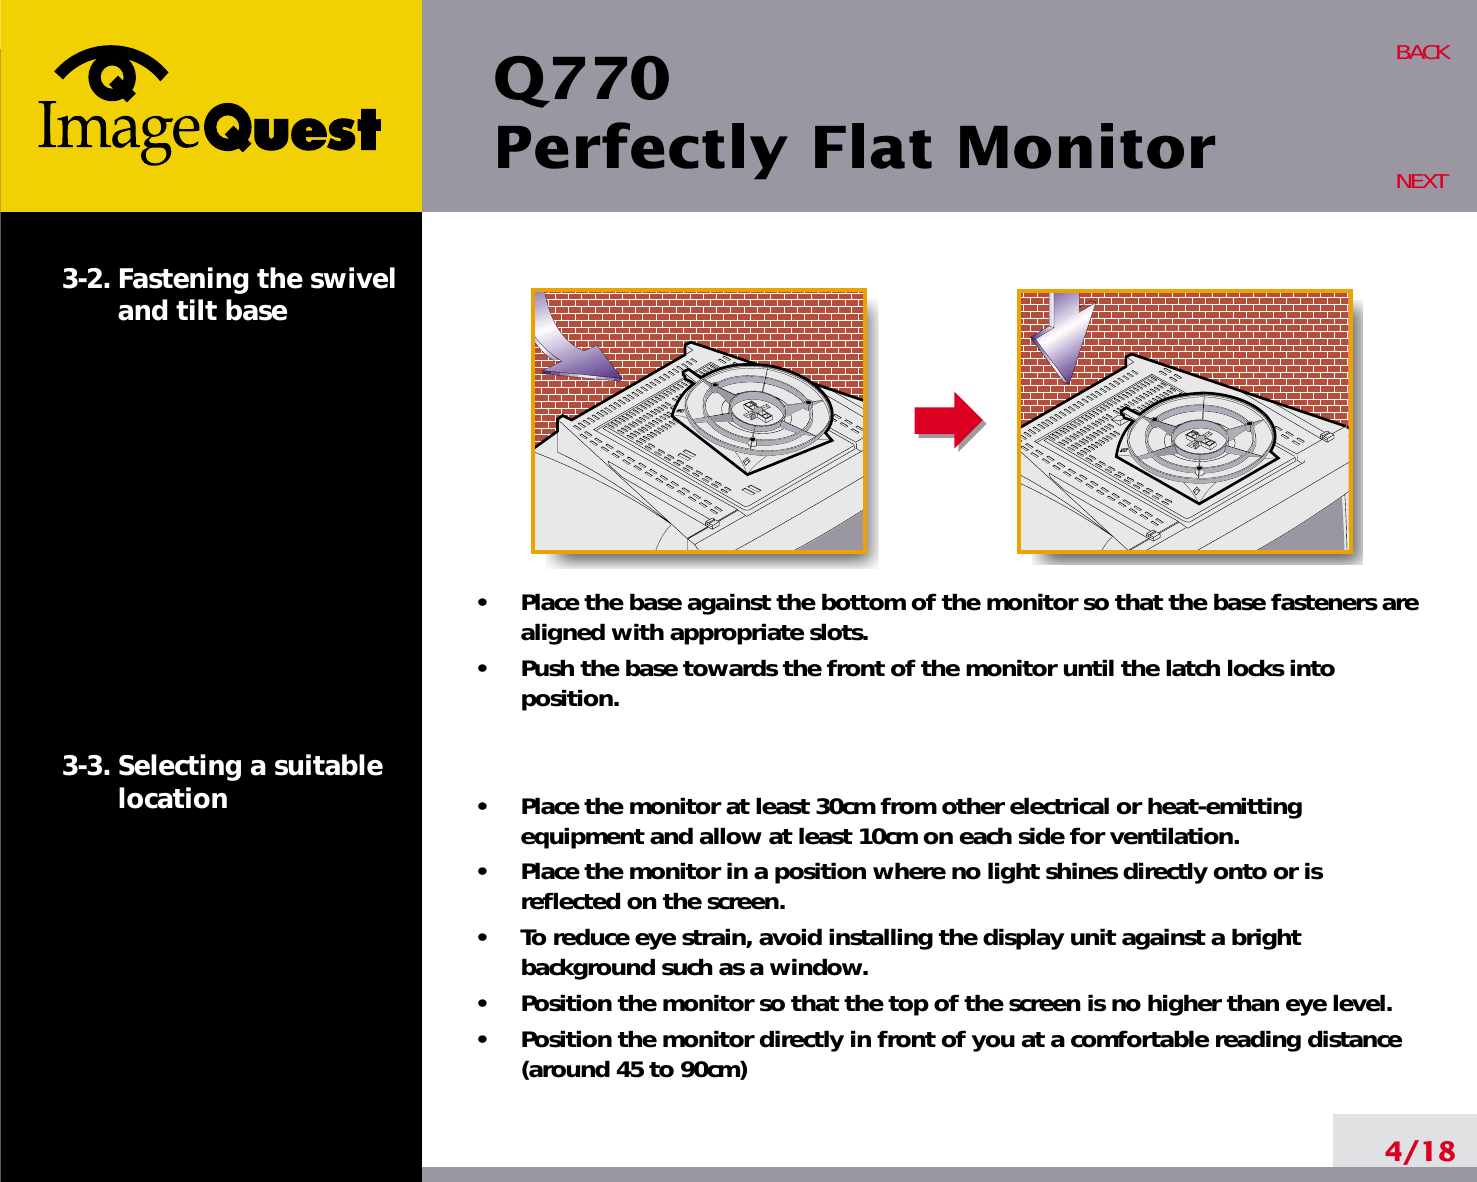 Q770Perfectly Flat Monitor4/18BACKNEXT3-2. Fastening the swiveland tilt base3-3. Selecting a suitablelocation•     Place the base against the bottom of the monitor so that the base fasteners arealigned with appropriate slots.•     Push the base towards the front of the monitor until the latch locks intoposition.•     Place the monitor at least 30cm from other electrical or heat-emittingequipment and allow at least 10cm on each side for ventilation.•     Place the monitor in a position where no light shines directly onto or isreflected on the screen.•     To reduce eye strain, avoid installing the display unit against a brightbackground such as a window.•     Position the monitor so that the top of the screen is no higher than eye level.•     Position the monitor directly in front of you at a comfortable reading distance(around 45 to 90cm) 